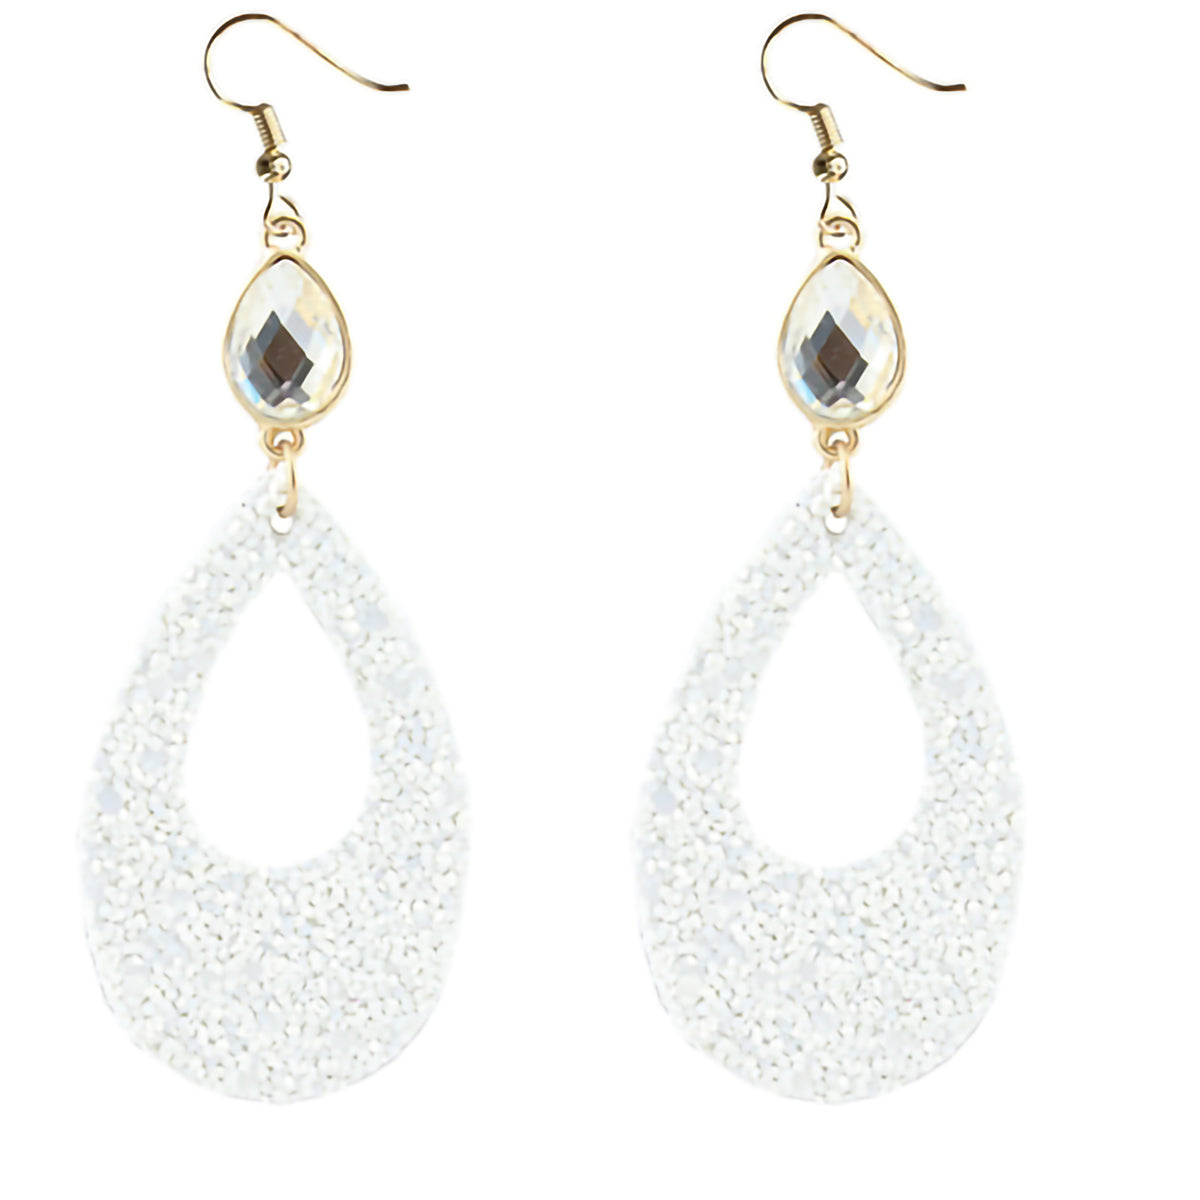 73640 - Druzzy Crystal Earrings - White - Fashion Jewelry Wholesale